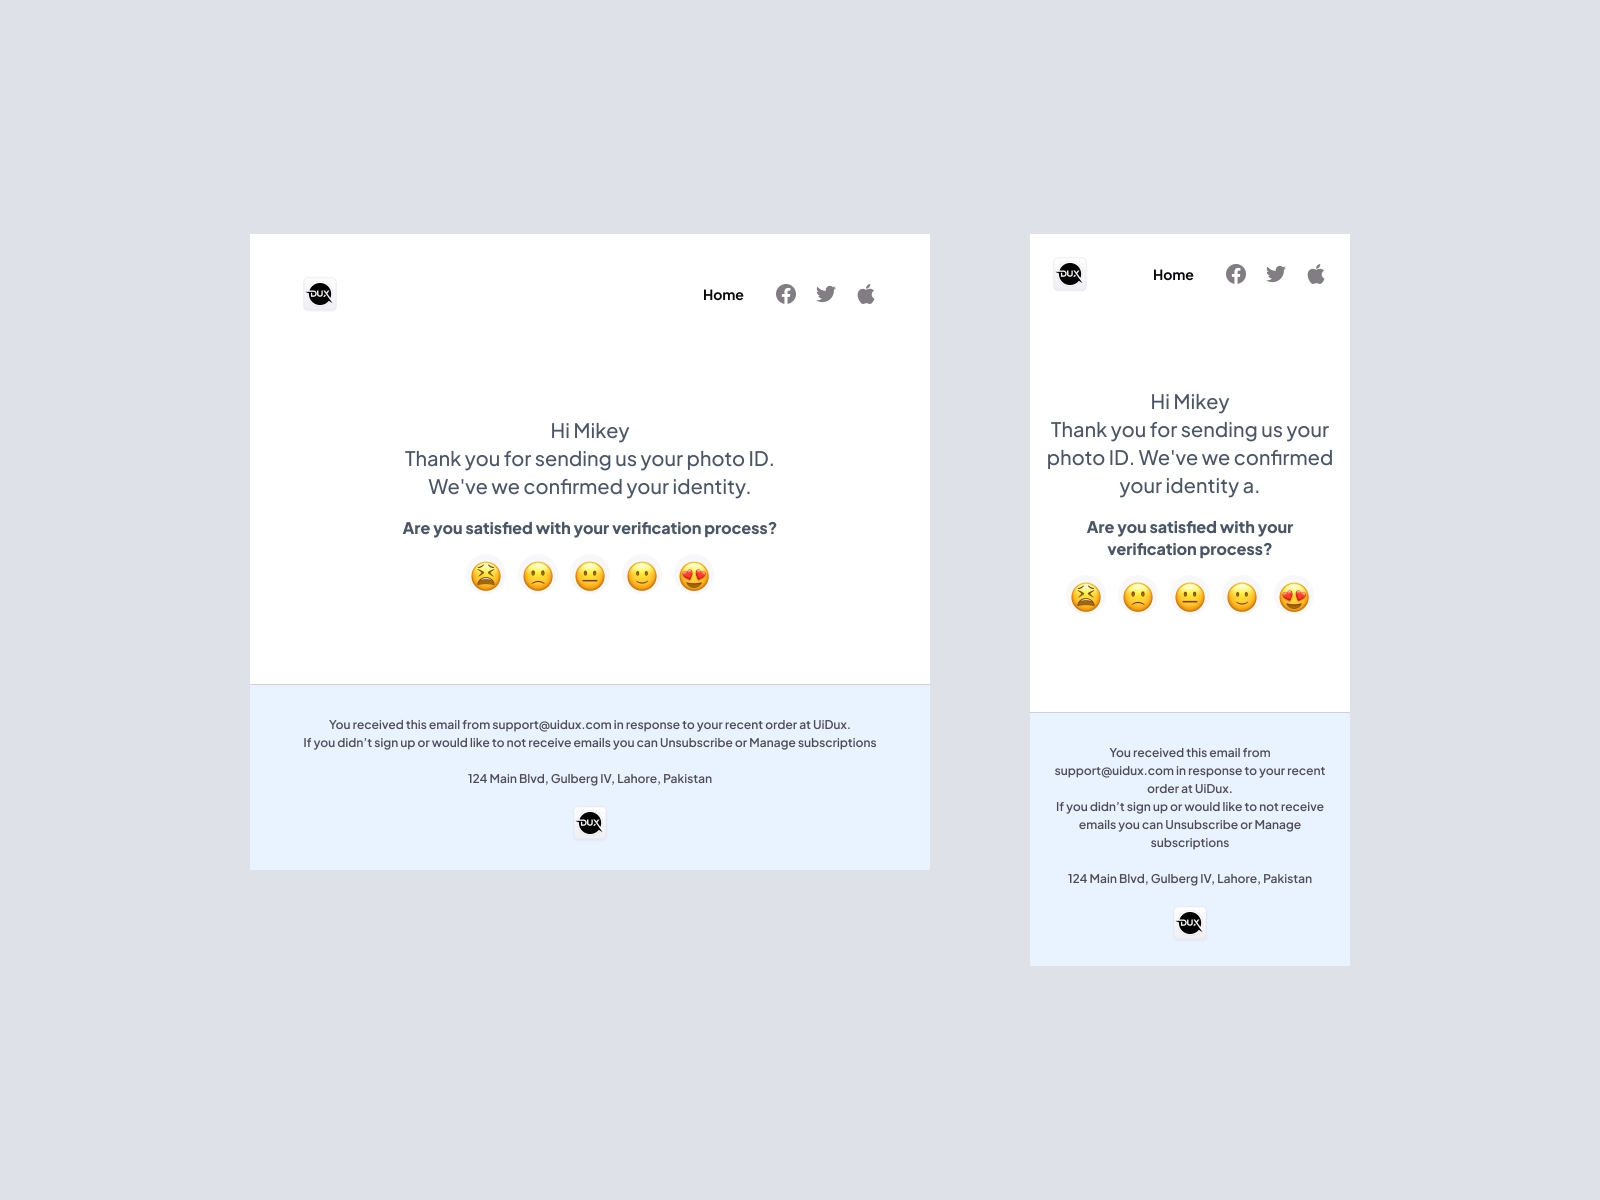 Email Design Templates - Survey/Feedback Email Design for Figma and Adobe XD - screen 2